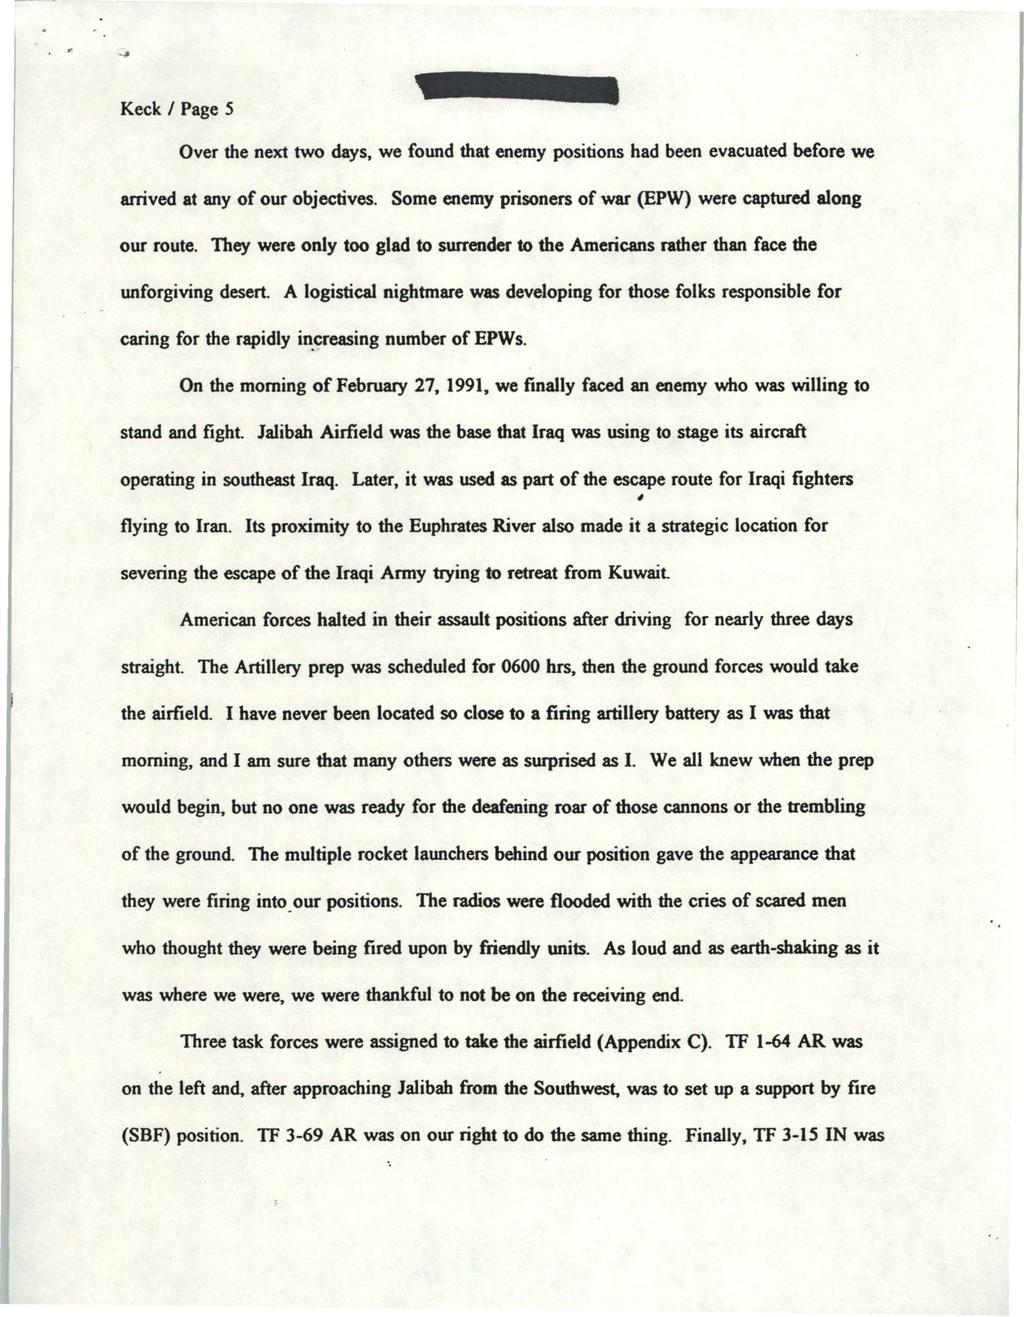 Keck Page 5 Over the next two days, we found that enemy positions had been evacuated before we arrived at any of our objectives. Some enemy prisoners of war (EPW) were captured along our route.